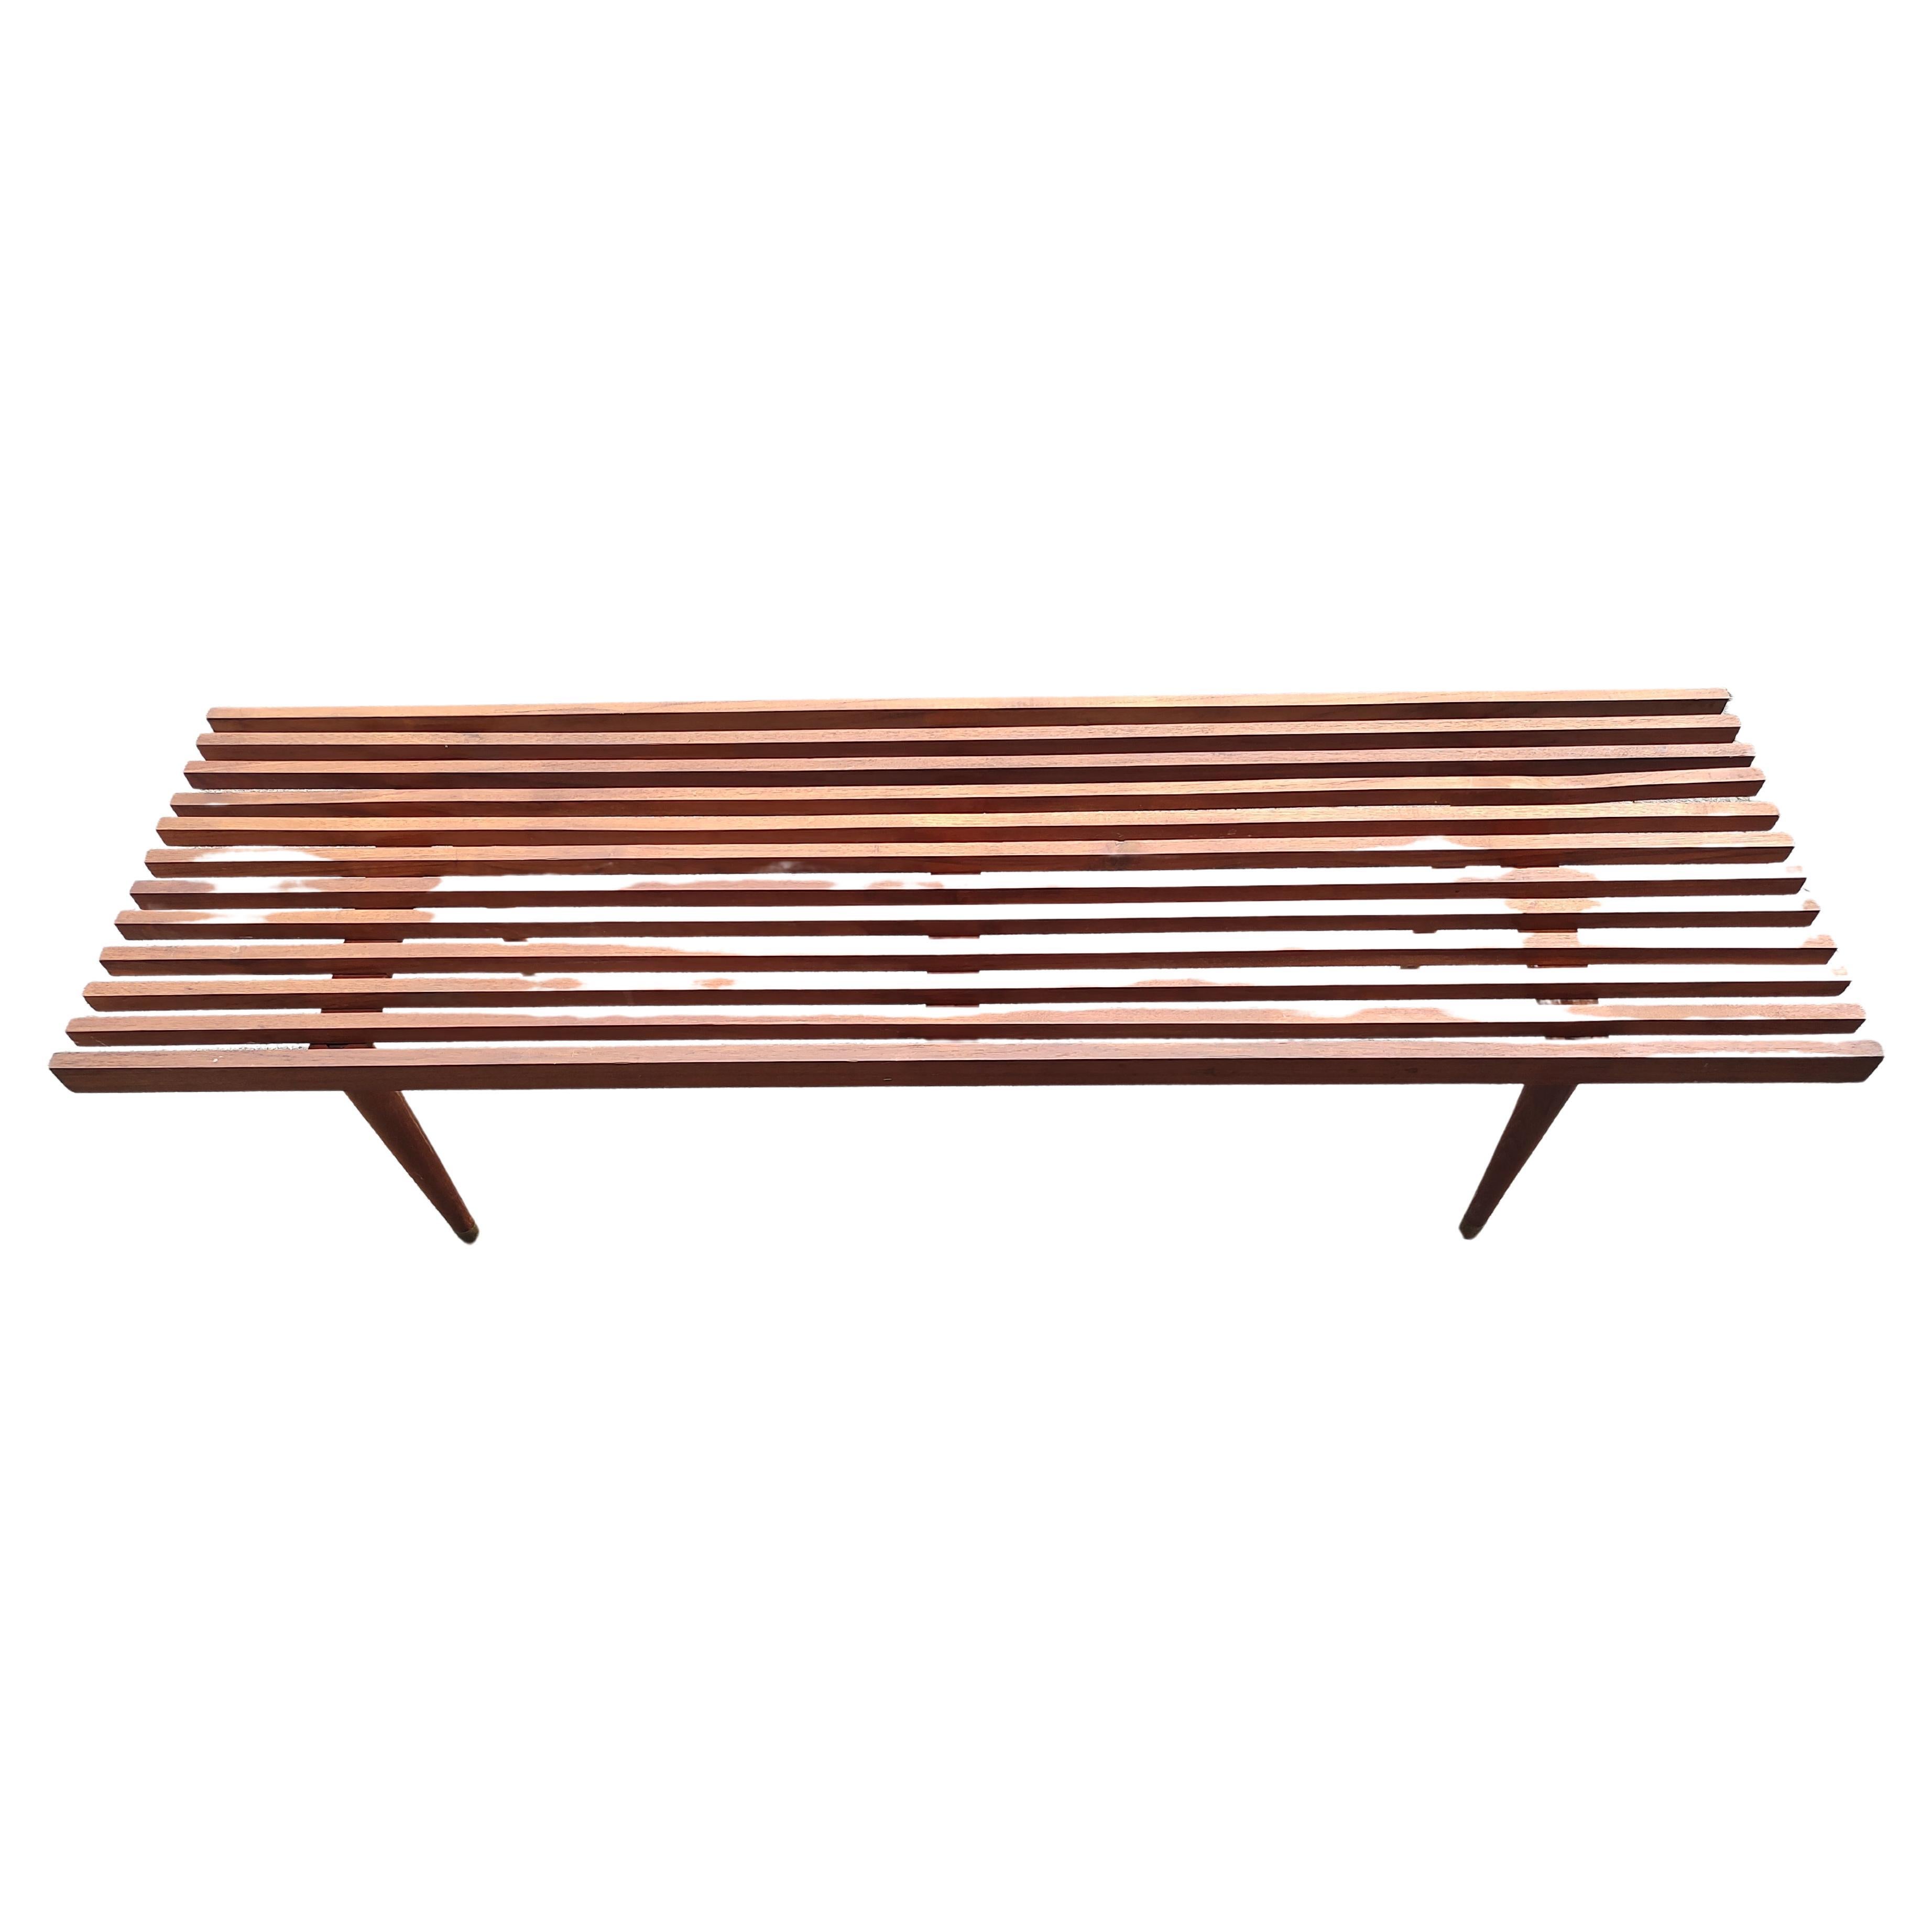 American Mid Century Modern Sculptural Teak Cocktail Table style of George Nelson  For Sale